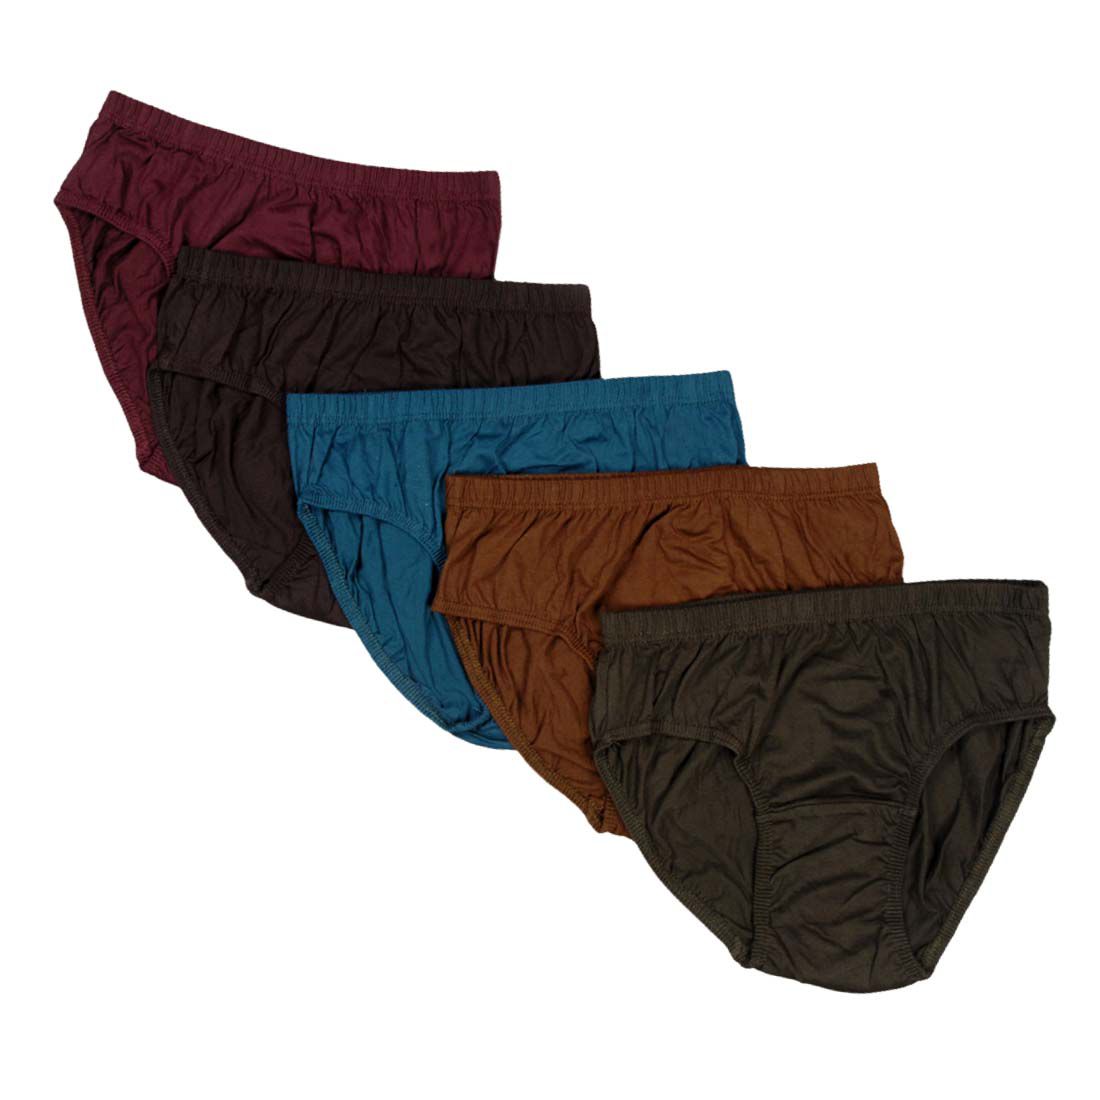 Buy Sr Creations Cotton Briefs Online at Best Prices in India - Snapdeal